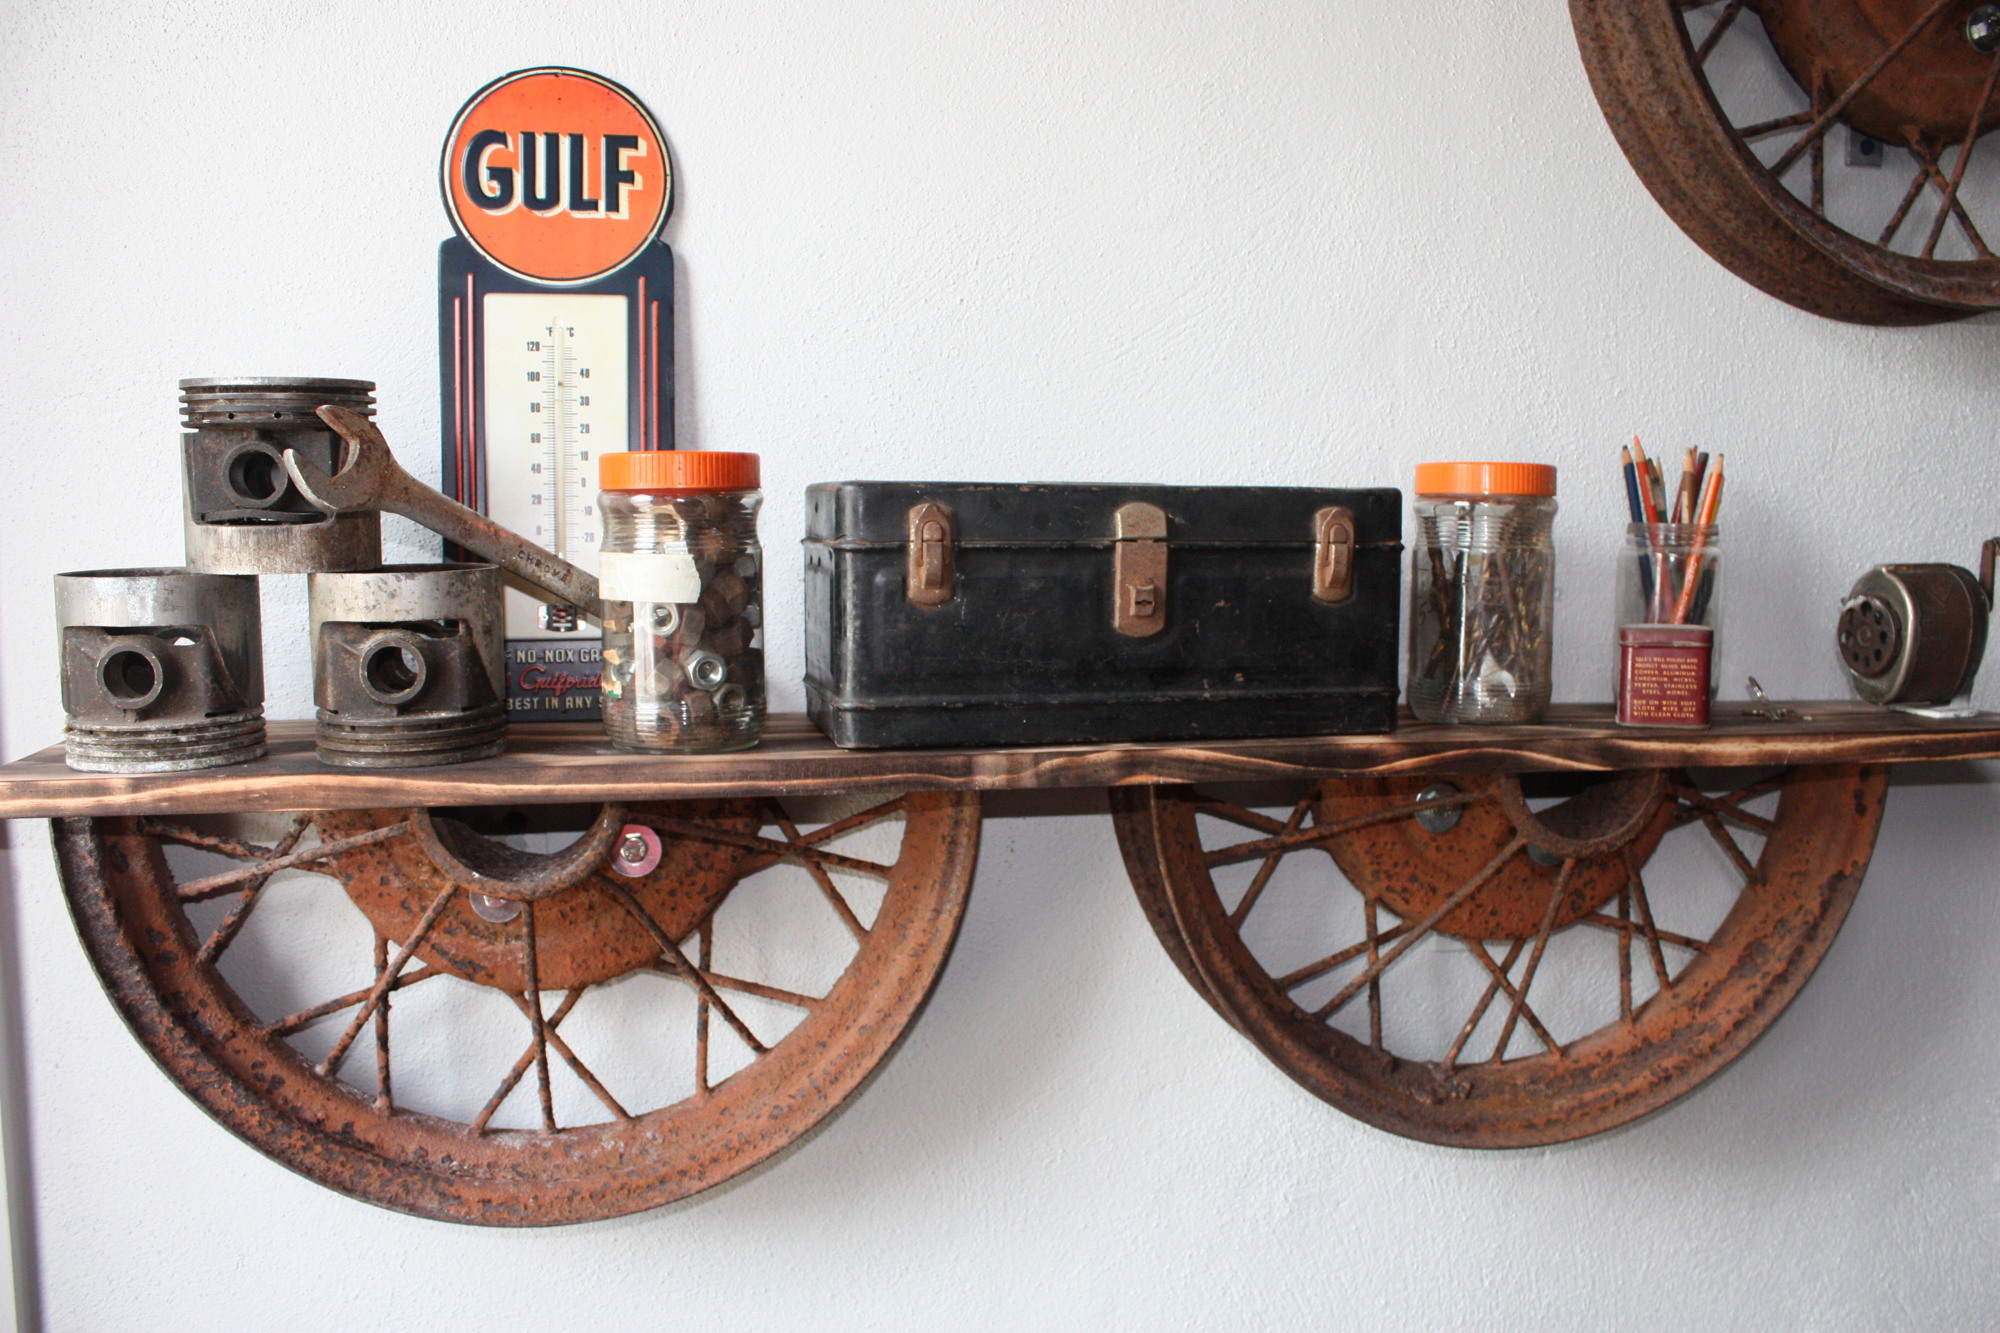 Items from Bud Pike’s workshop are displayed on a shelf made from antique wheels. Photo by Wayne Grant